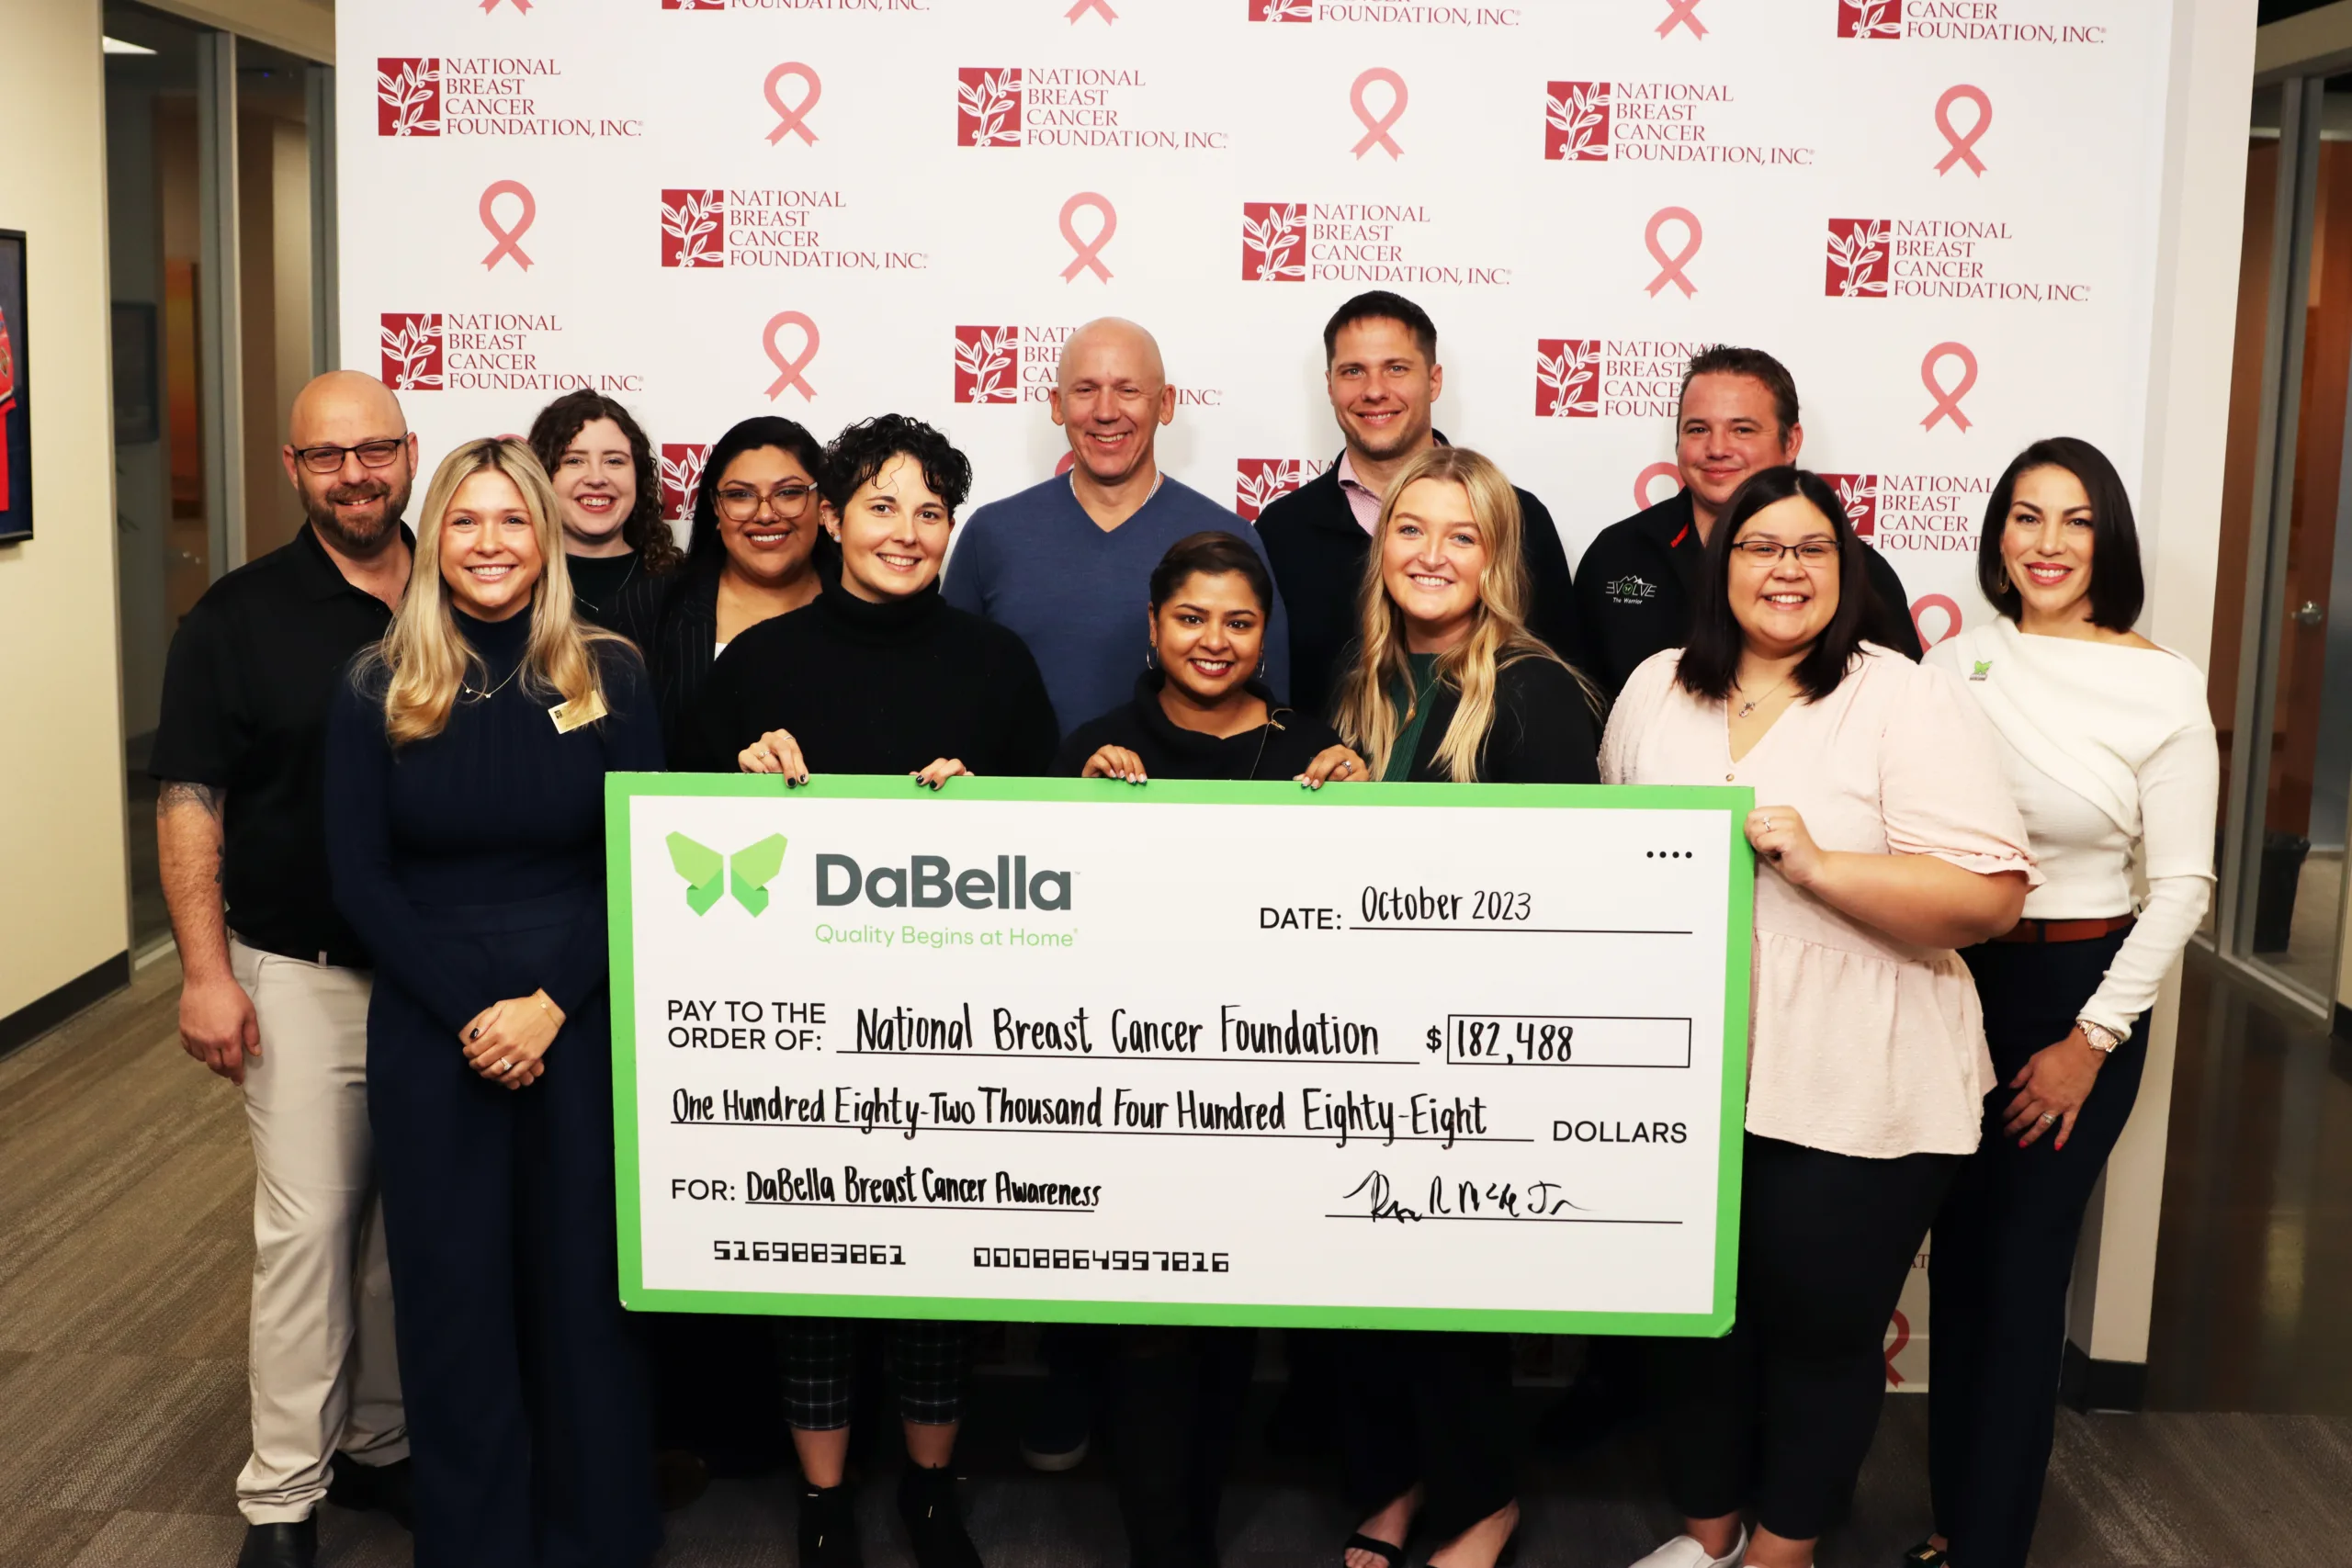 DaBella donating $182,488 to the National Breast Cancer Foundation